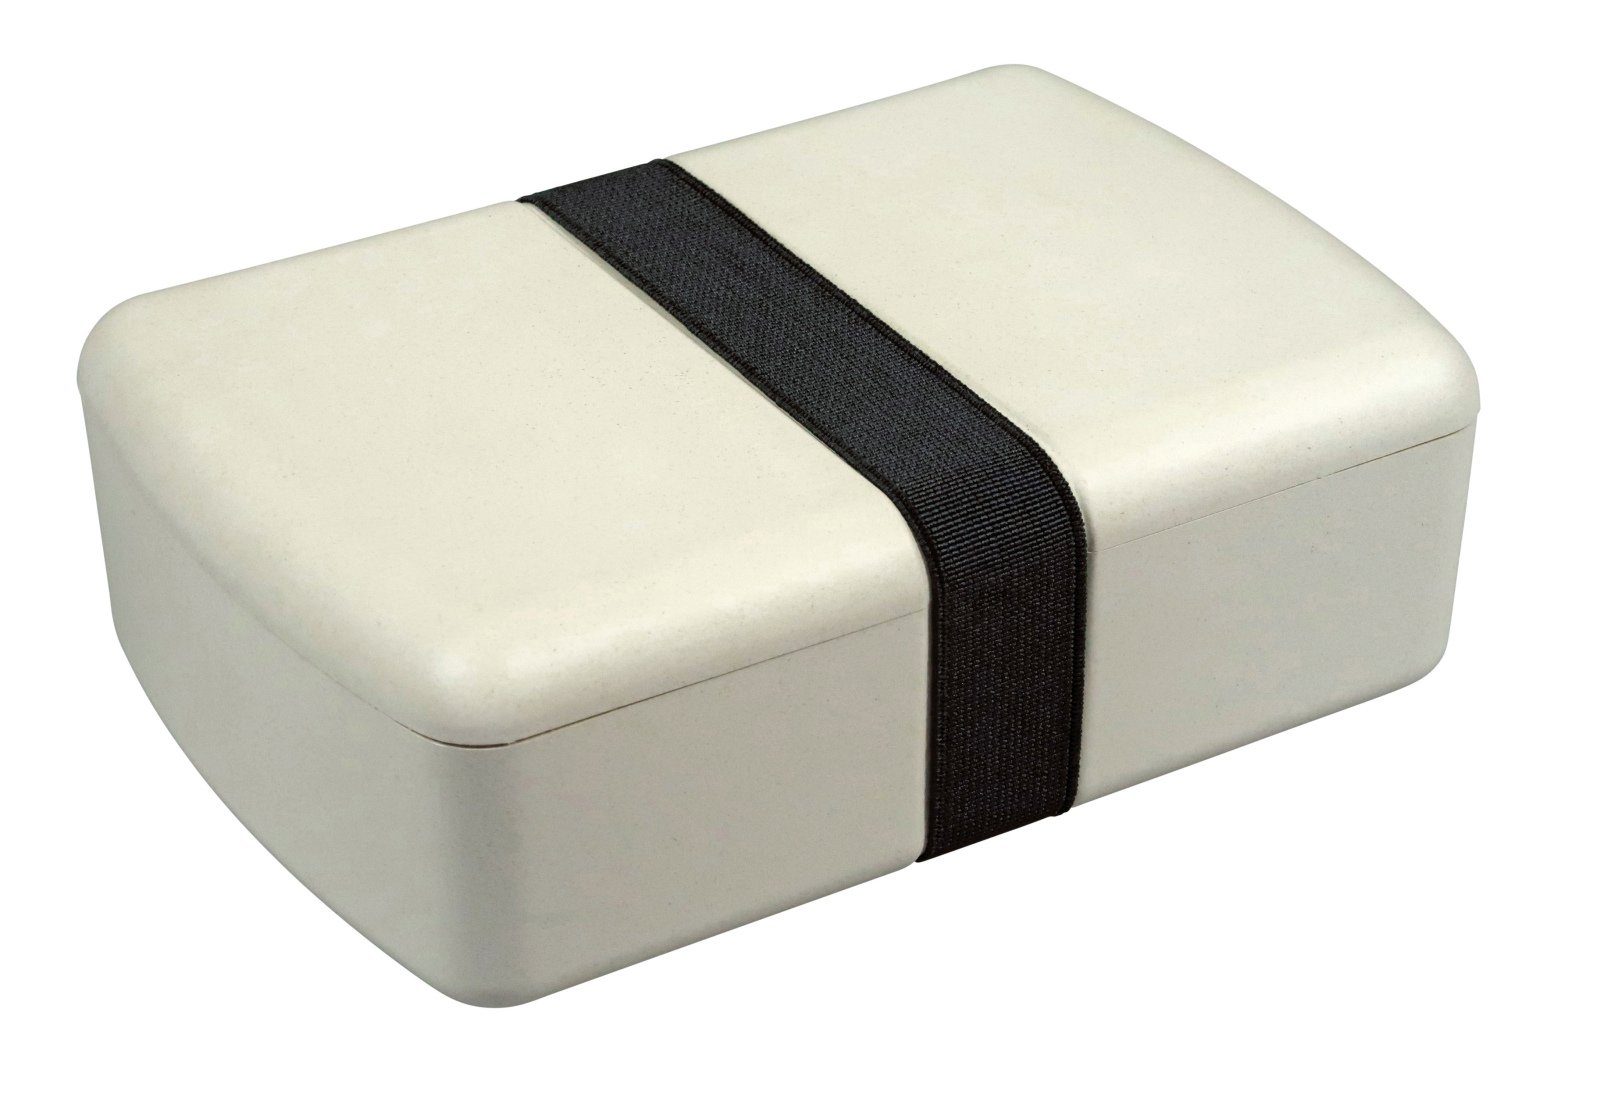 Capventure Lunchbox Zuperzozial Brotdose TIME-OUT-BOX Coconut-white